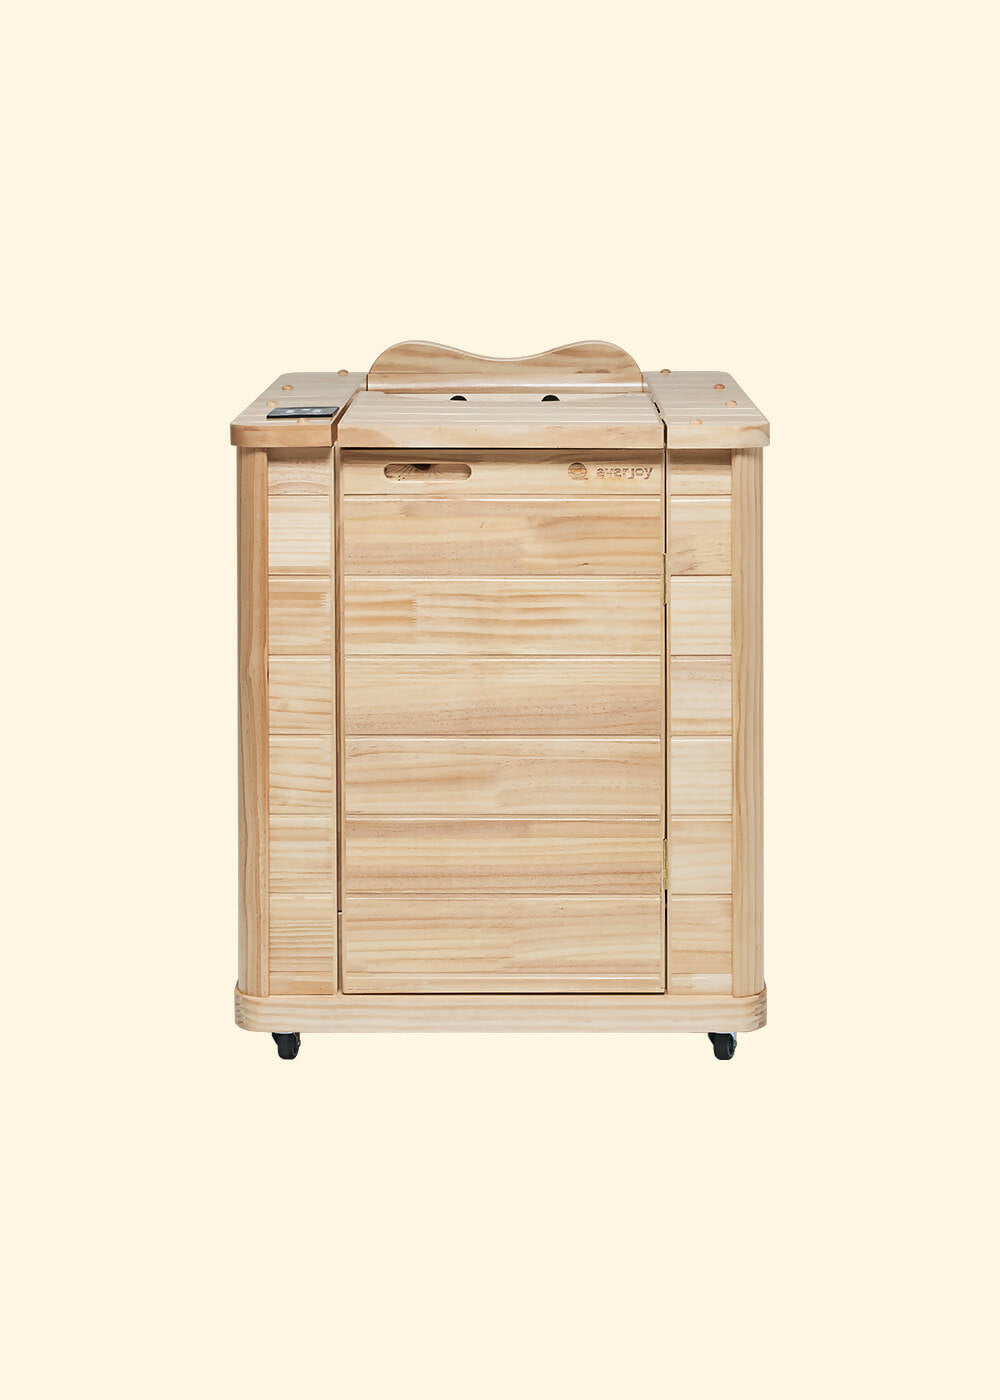 [EVENT] EVERJOY KN-102 Infrared Wood Dry Heated Sauna for Home (에버조이 건식 반신욕기 KN-102)